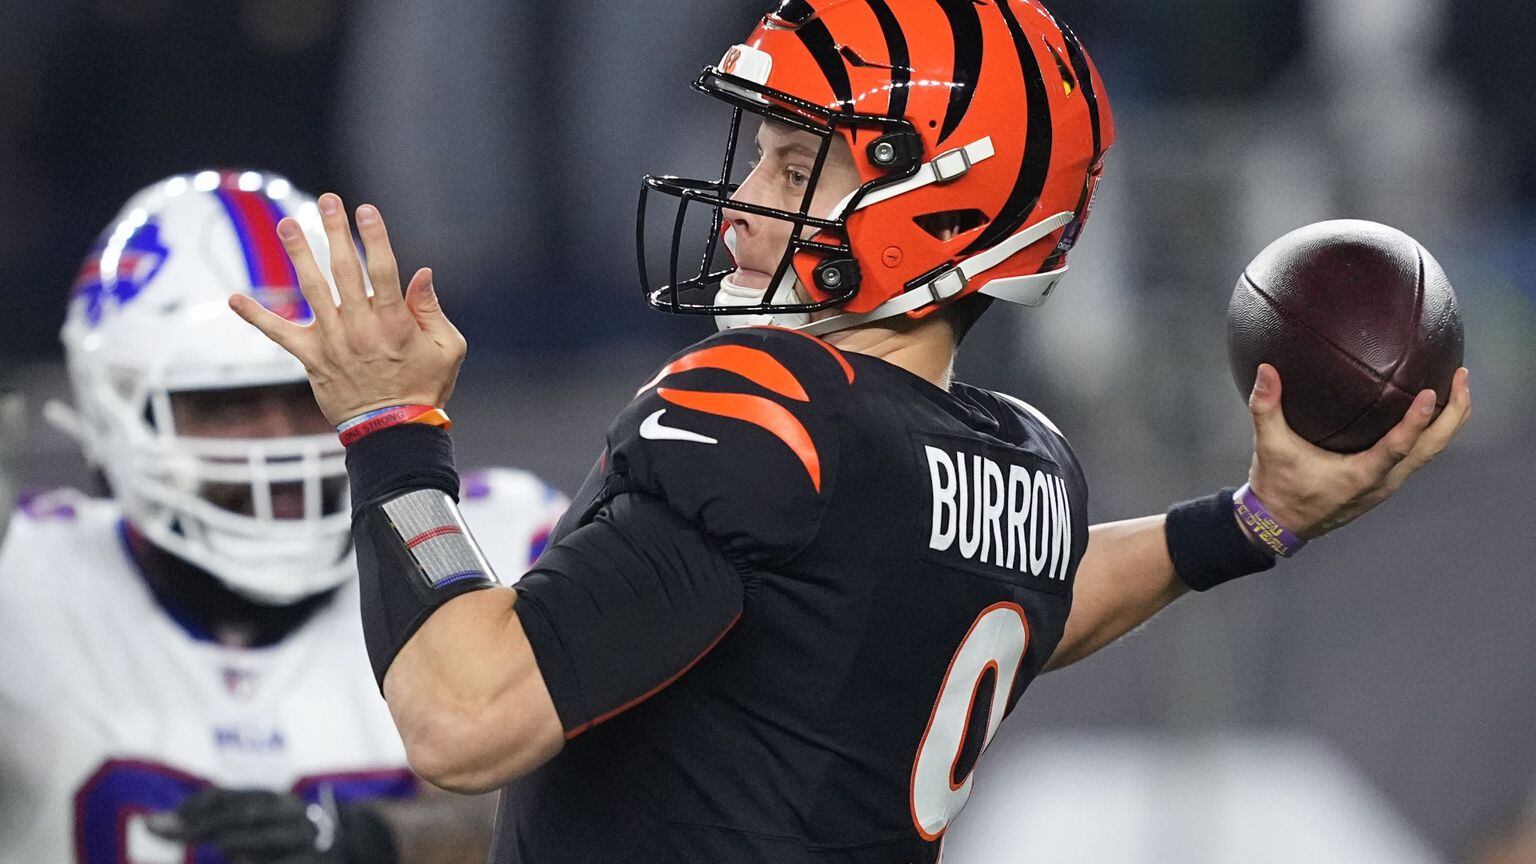 Here's the Cincinnati radio call of the Bengals' AFC Championship